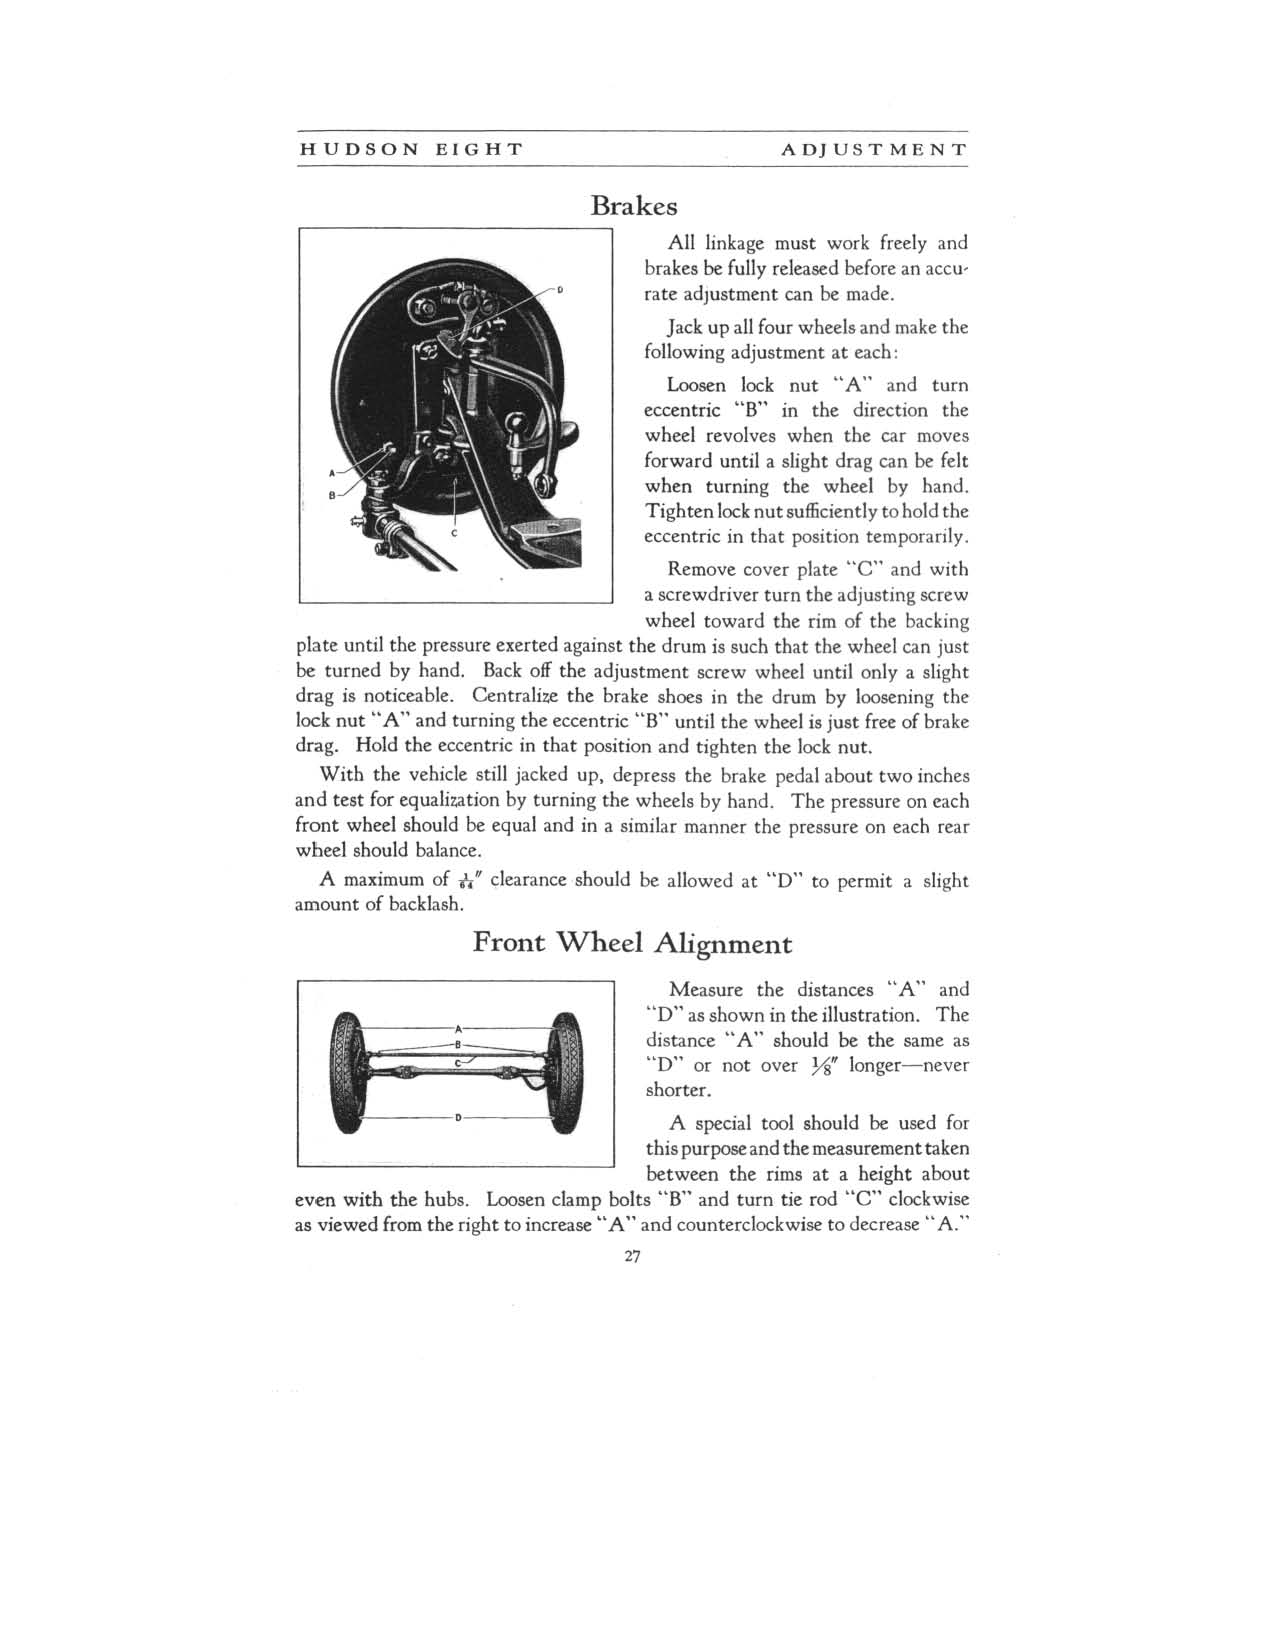 1931 Hudson 8 Instruction Book Page 2